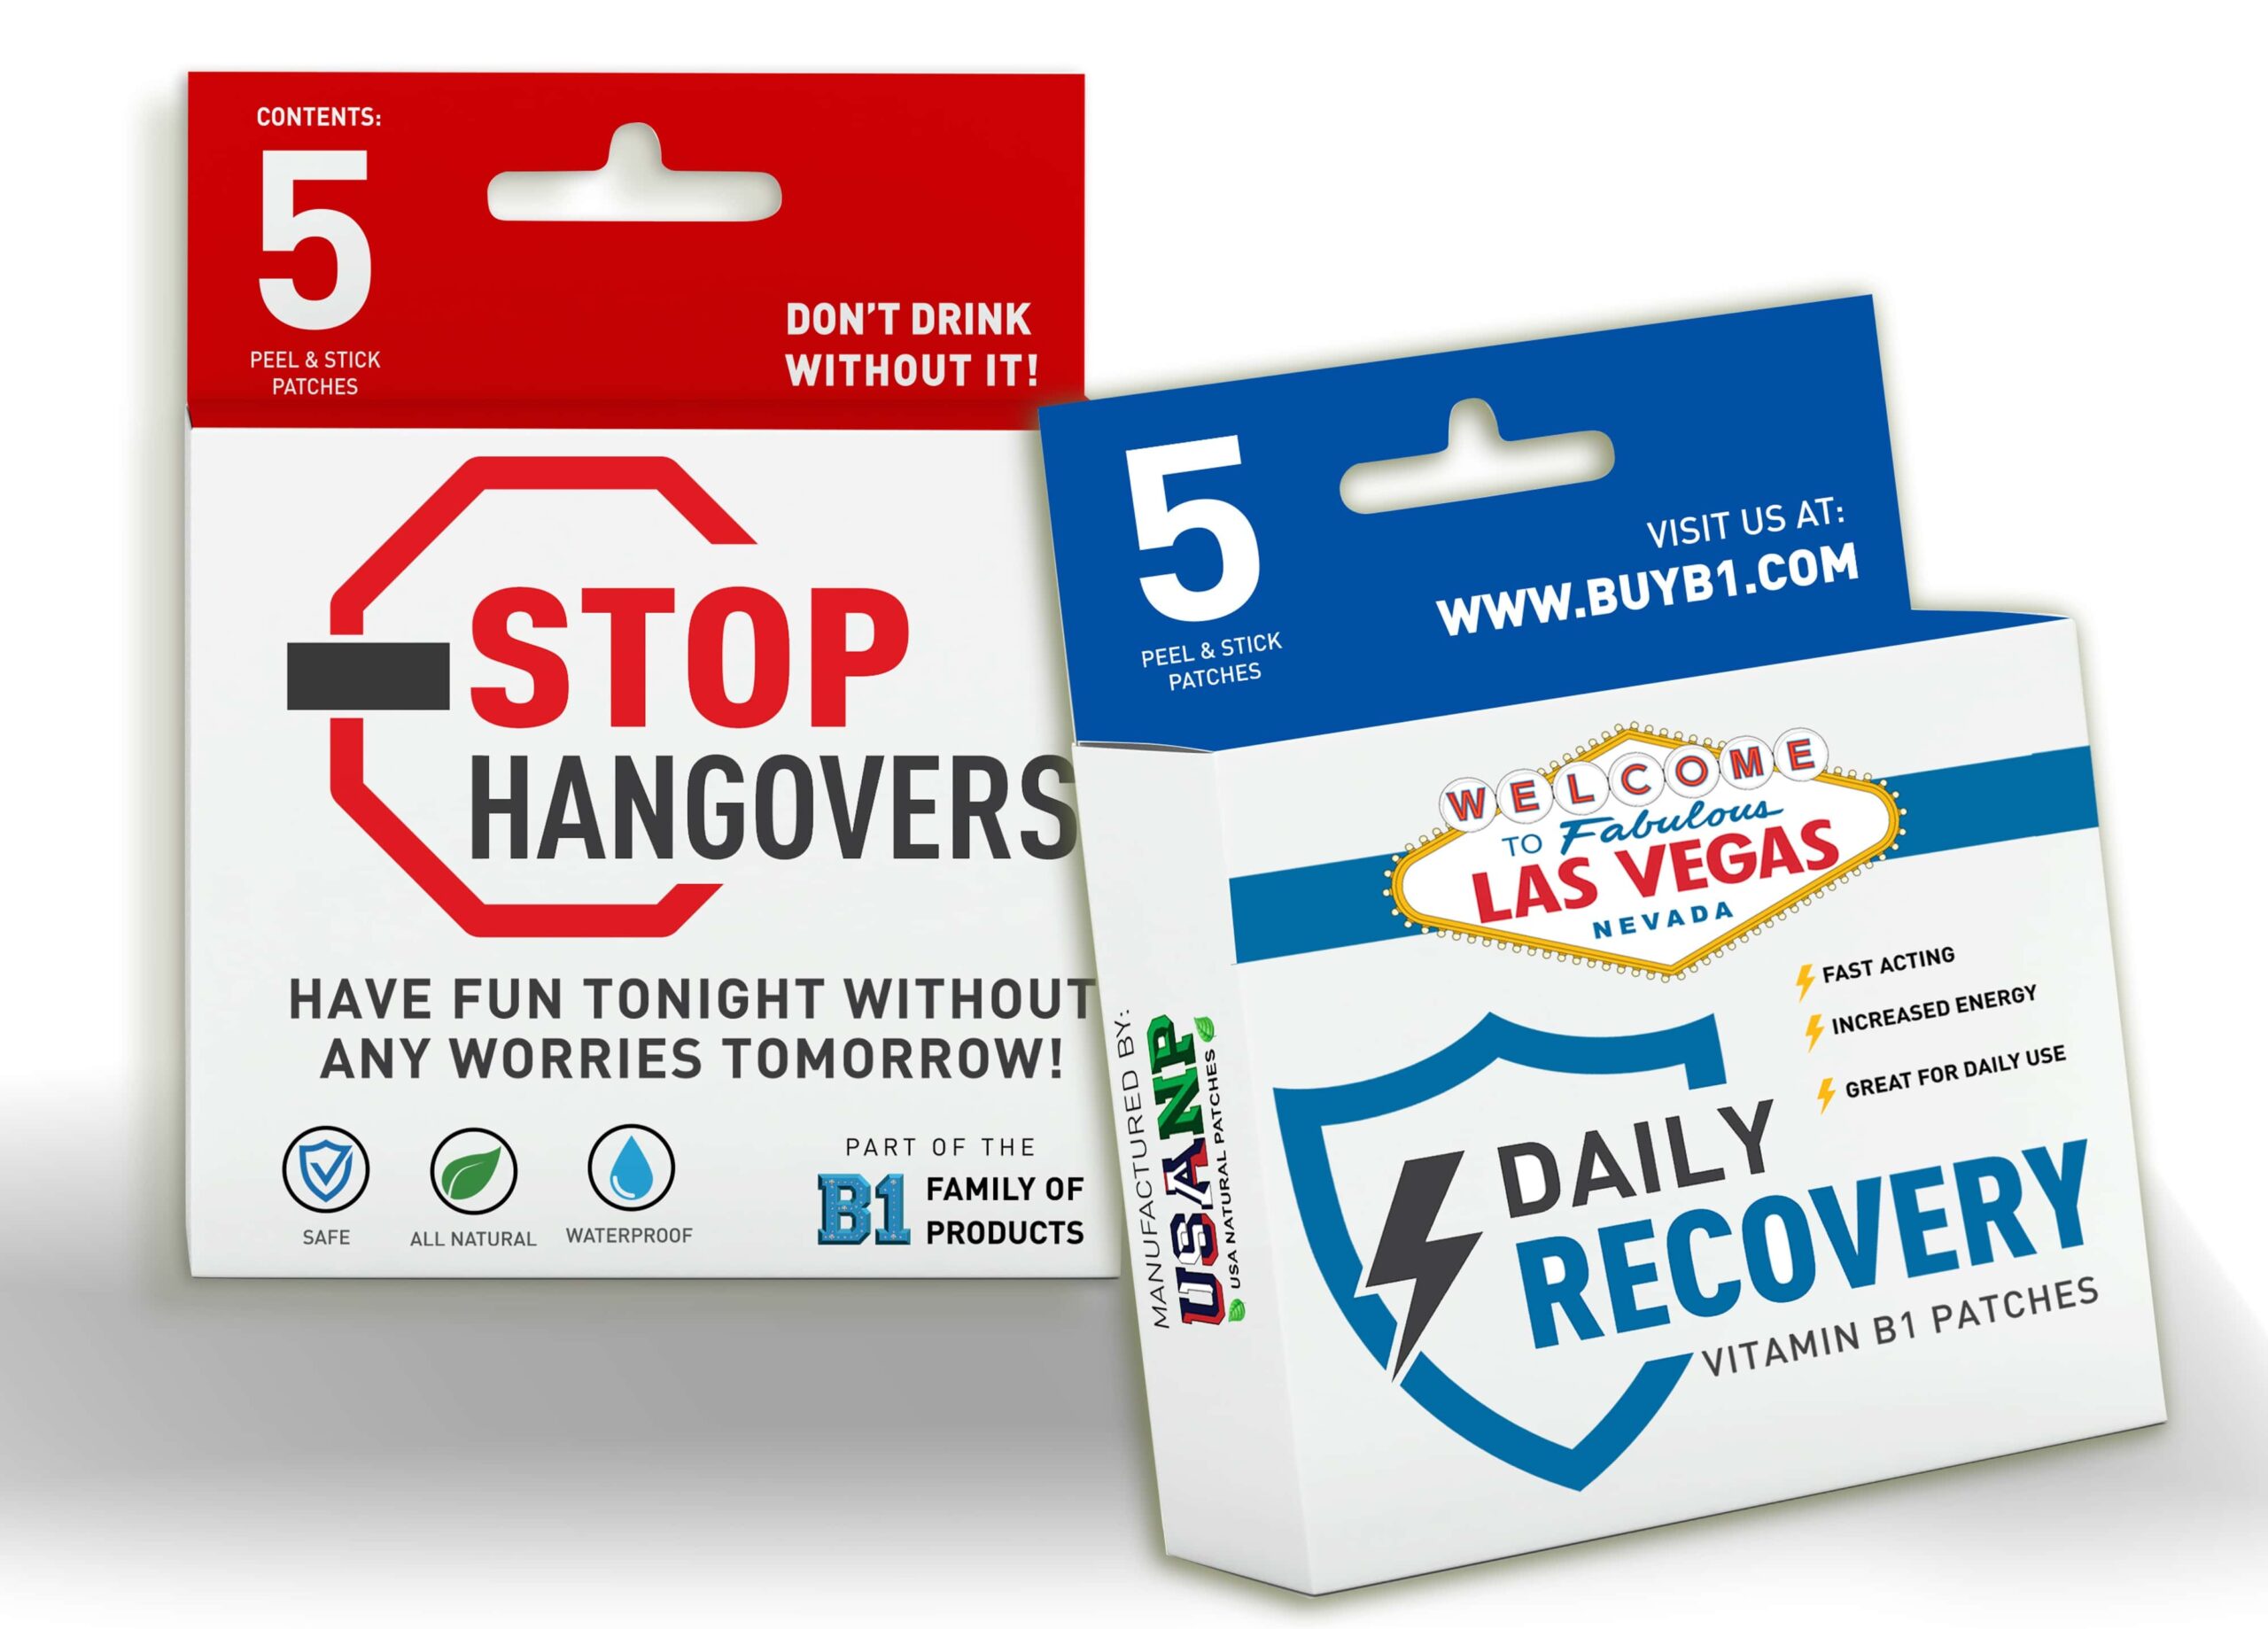 USA Natural Patches "Stop Hangovers" and "Daily Recovery" Vitamin B1 Patches